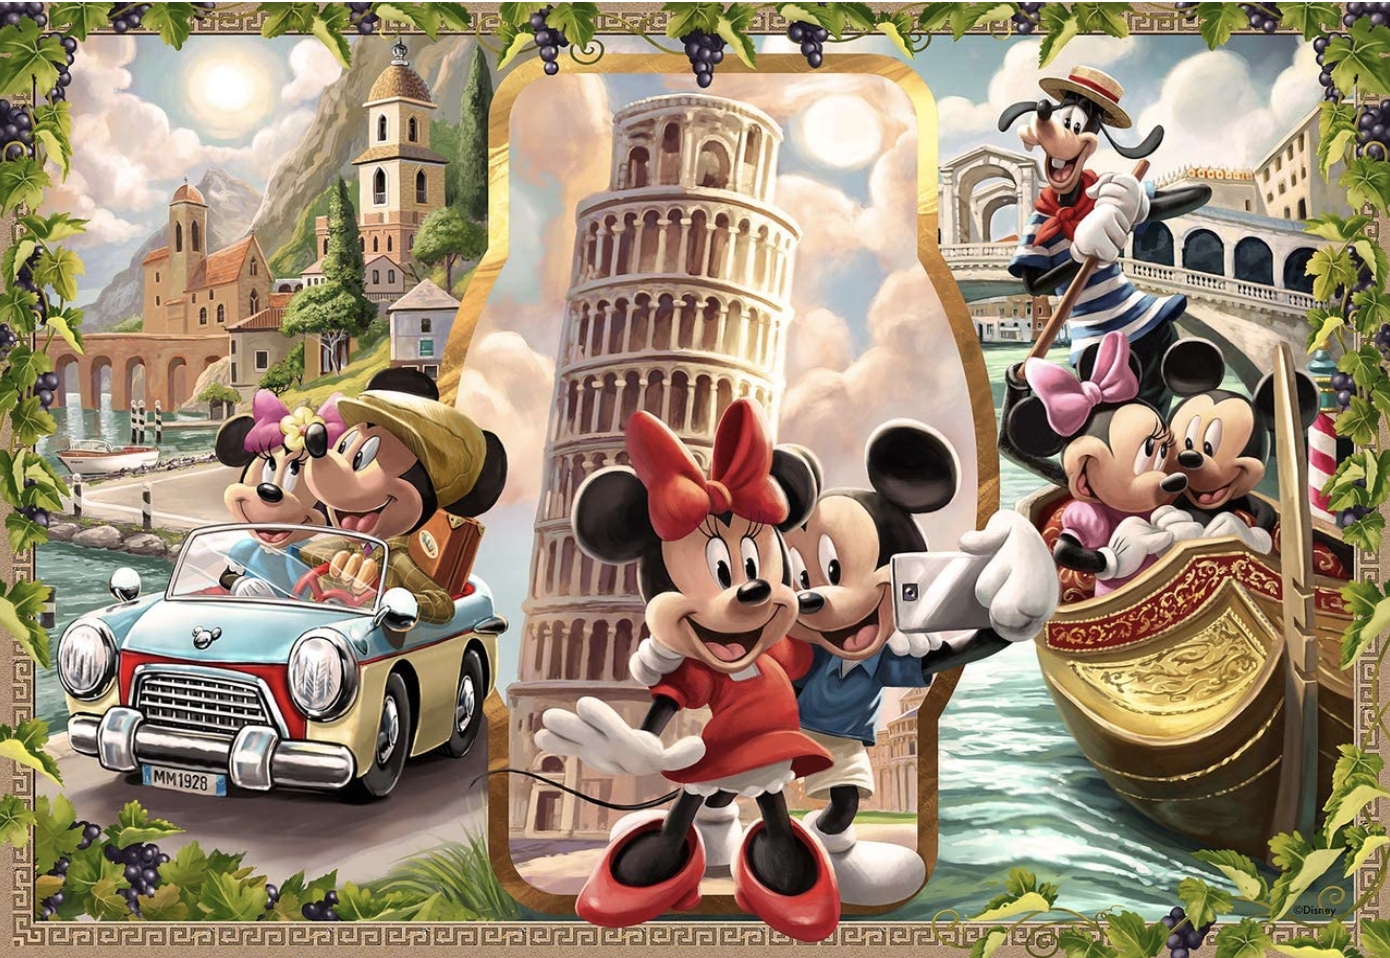 Ravensburger Jigsaw Puzzle | Mickey and Minnie Vacation 1000 Piece